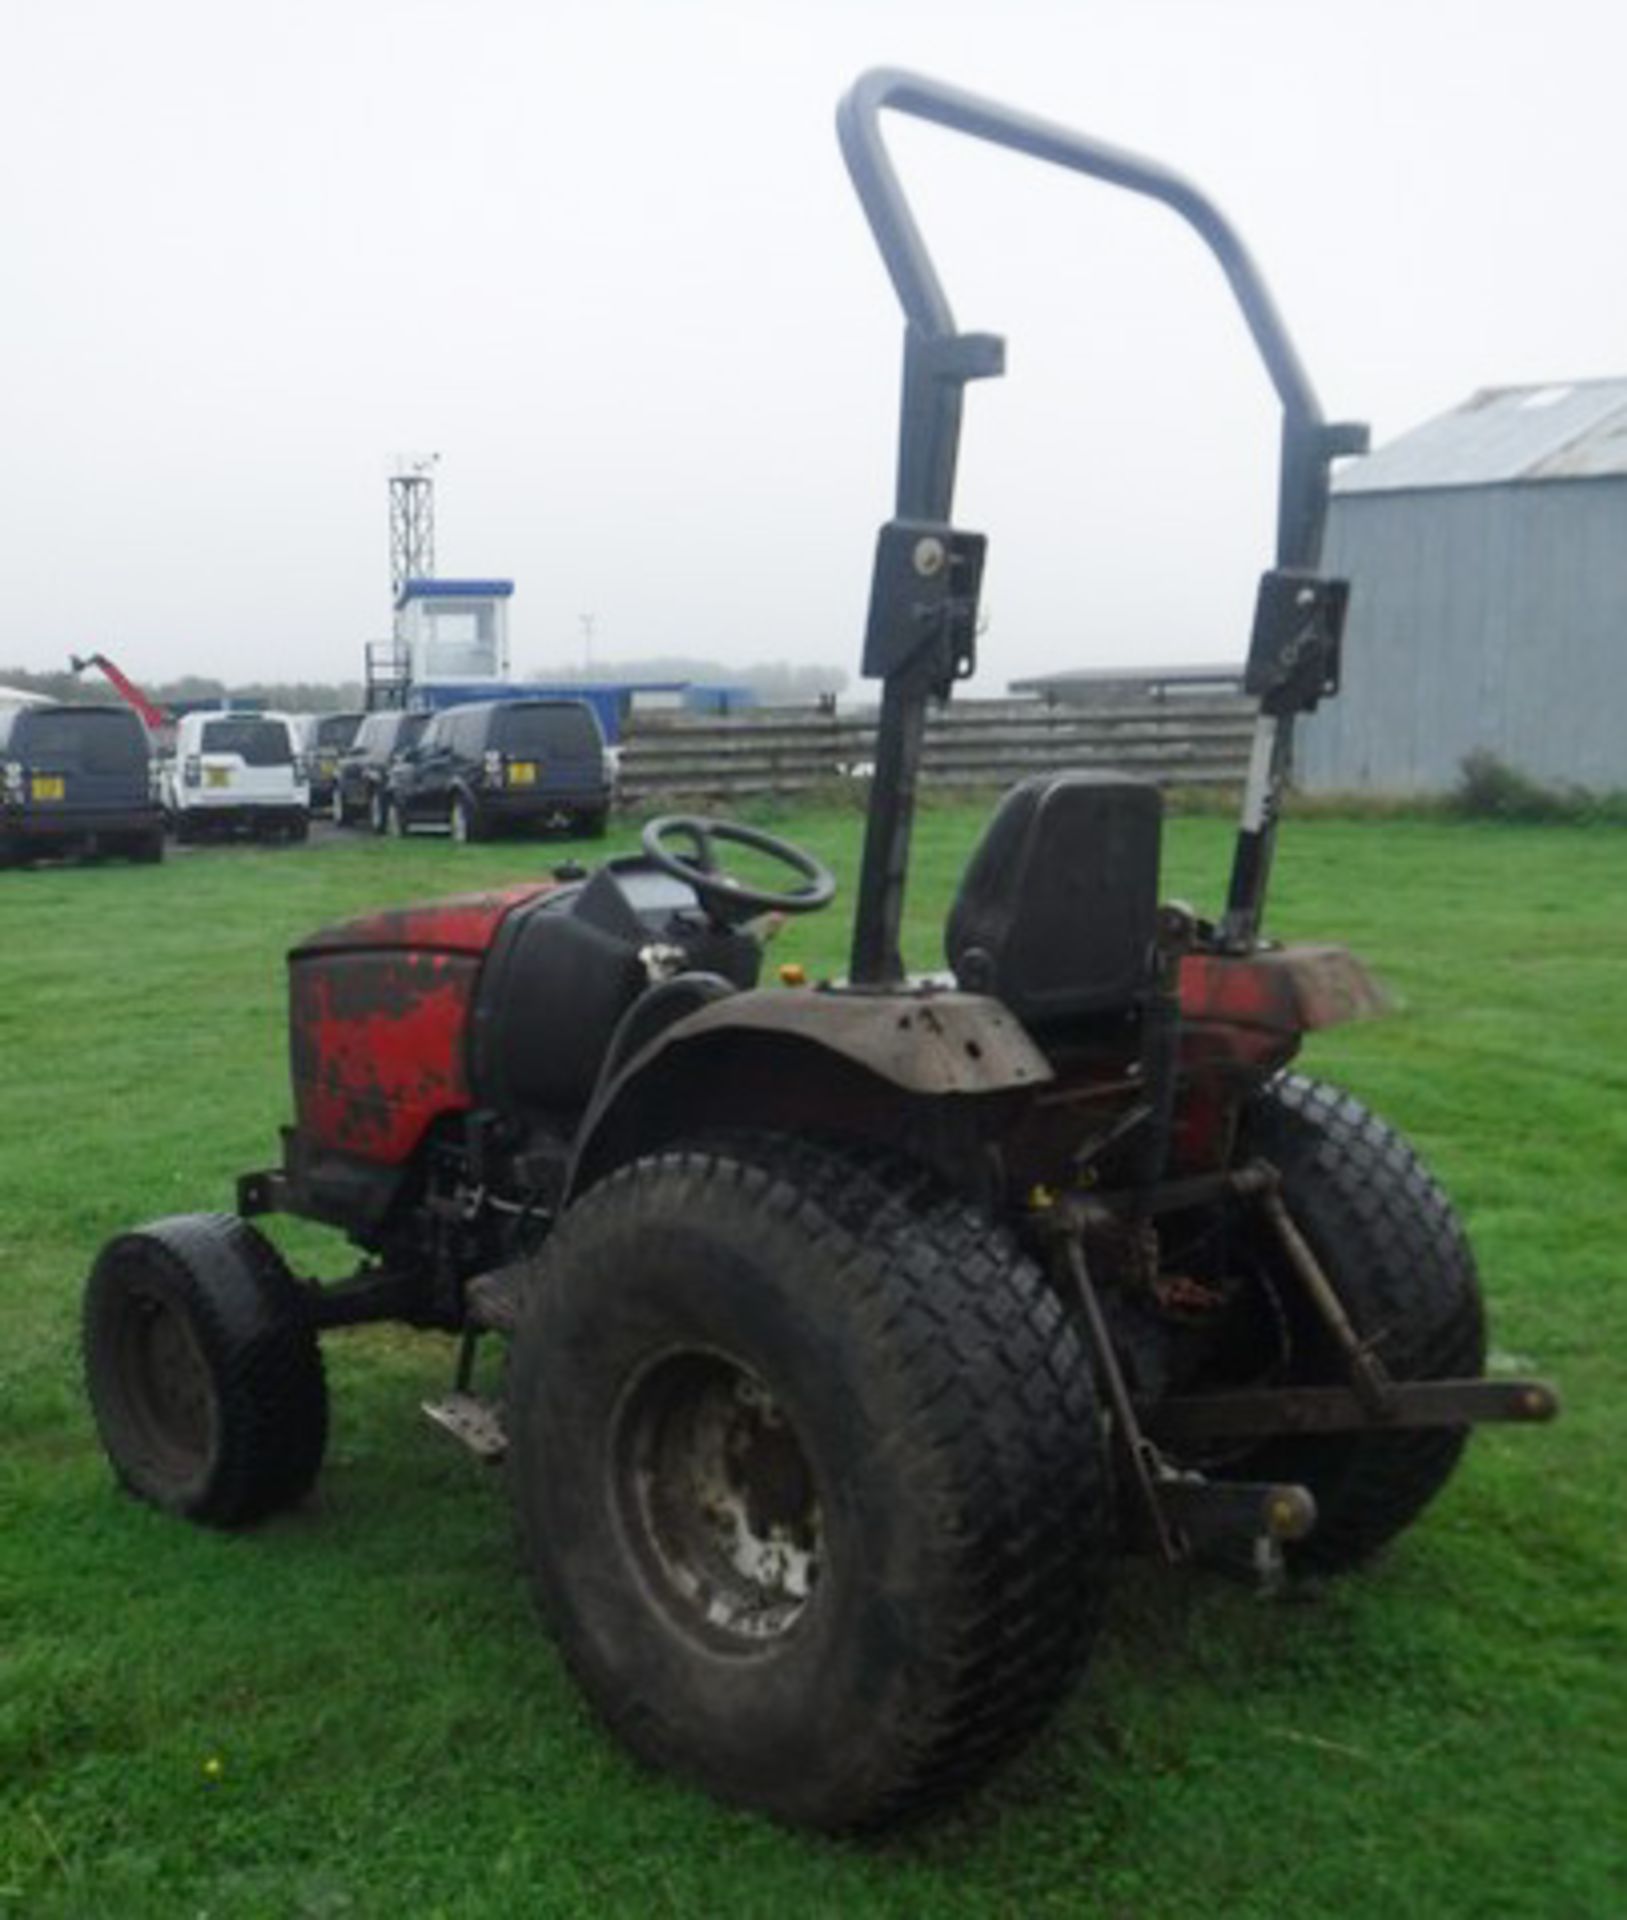 2011 SHIBAURA ST-333 compact tractor. S/N 21108, 2317hrs (not verified) - Image 7 of 12